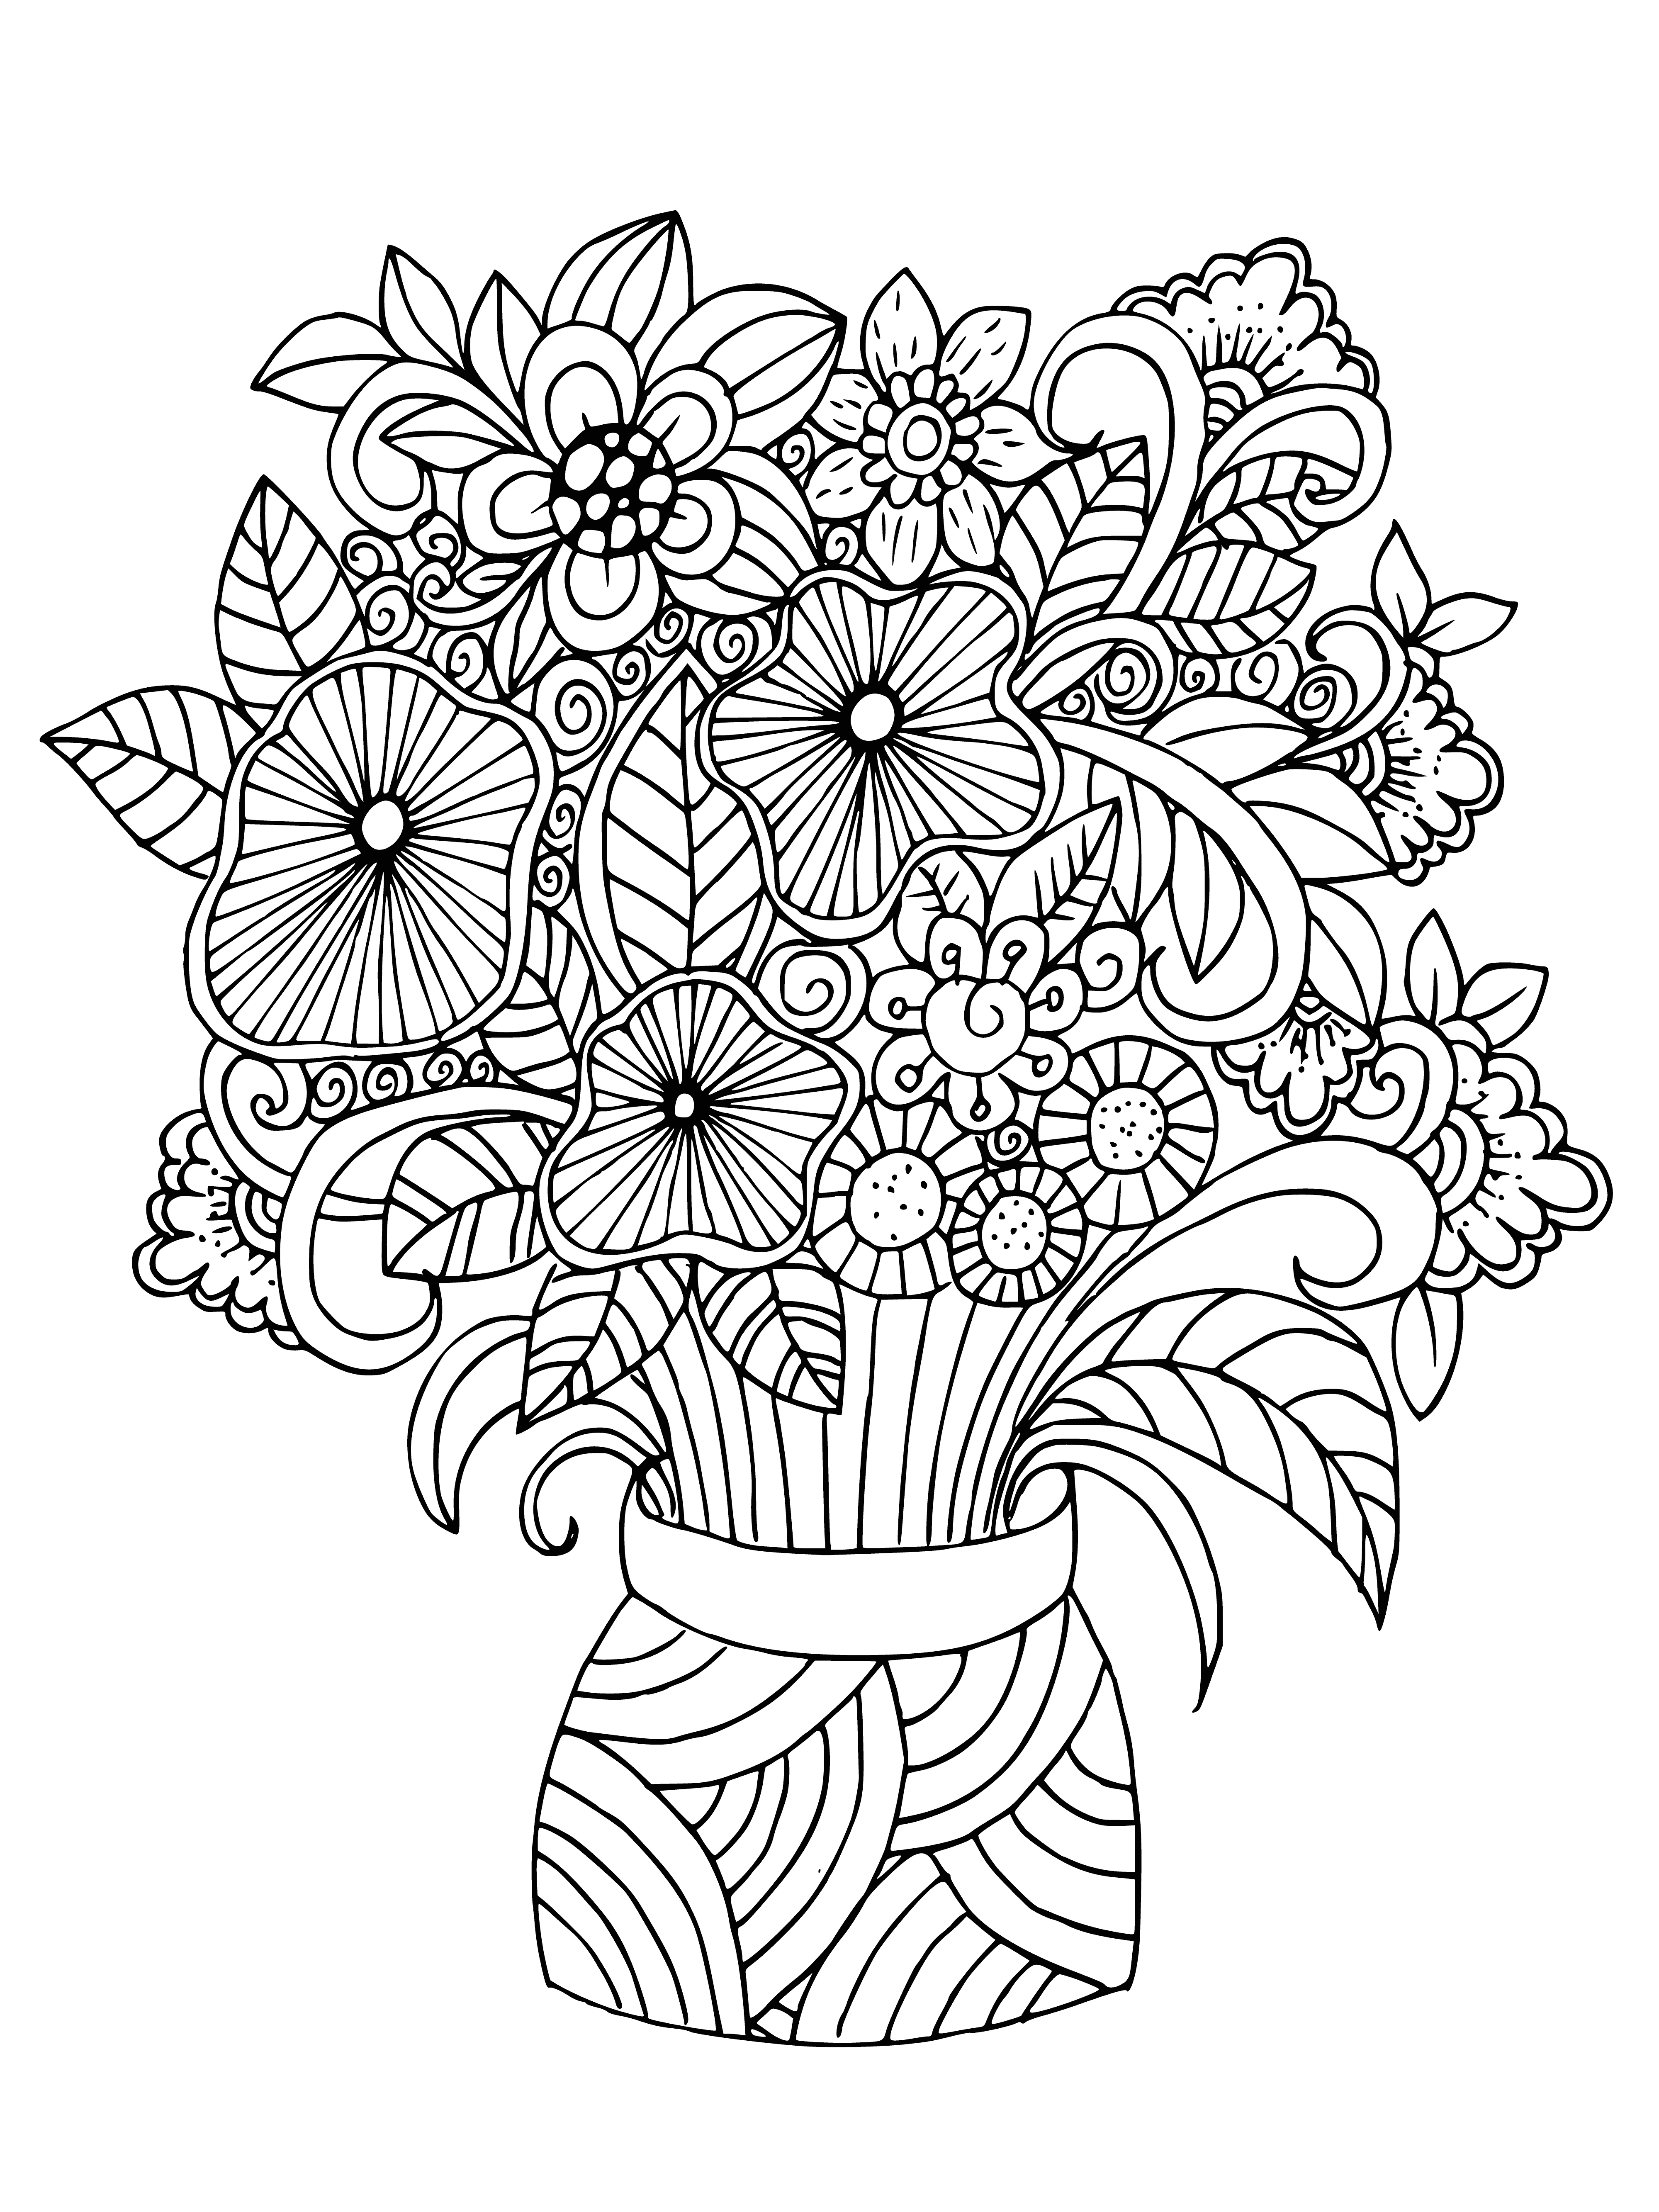 Flowers in a vase coloring page